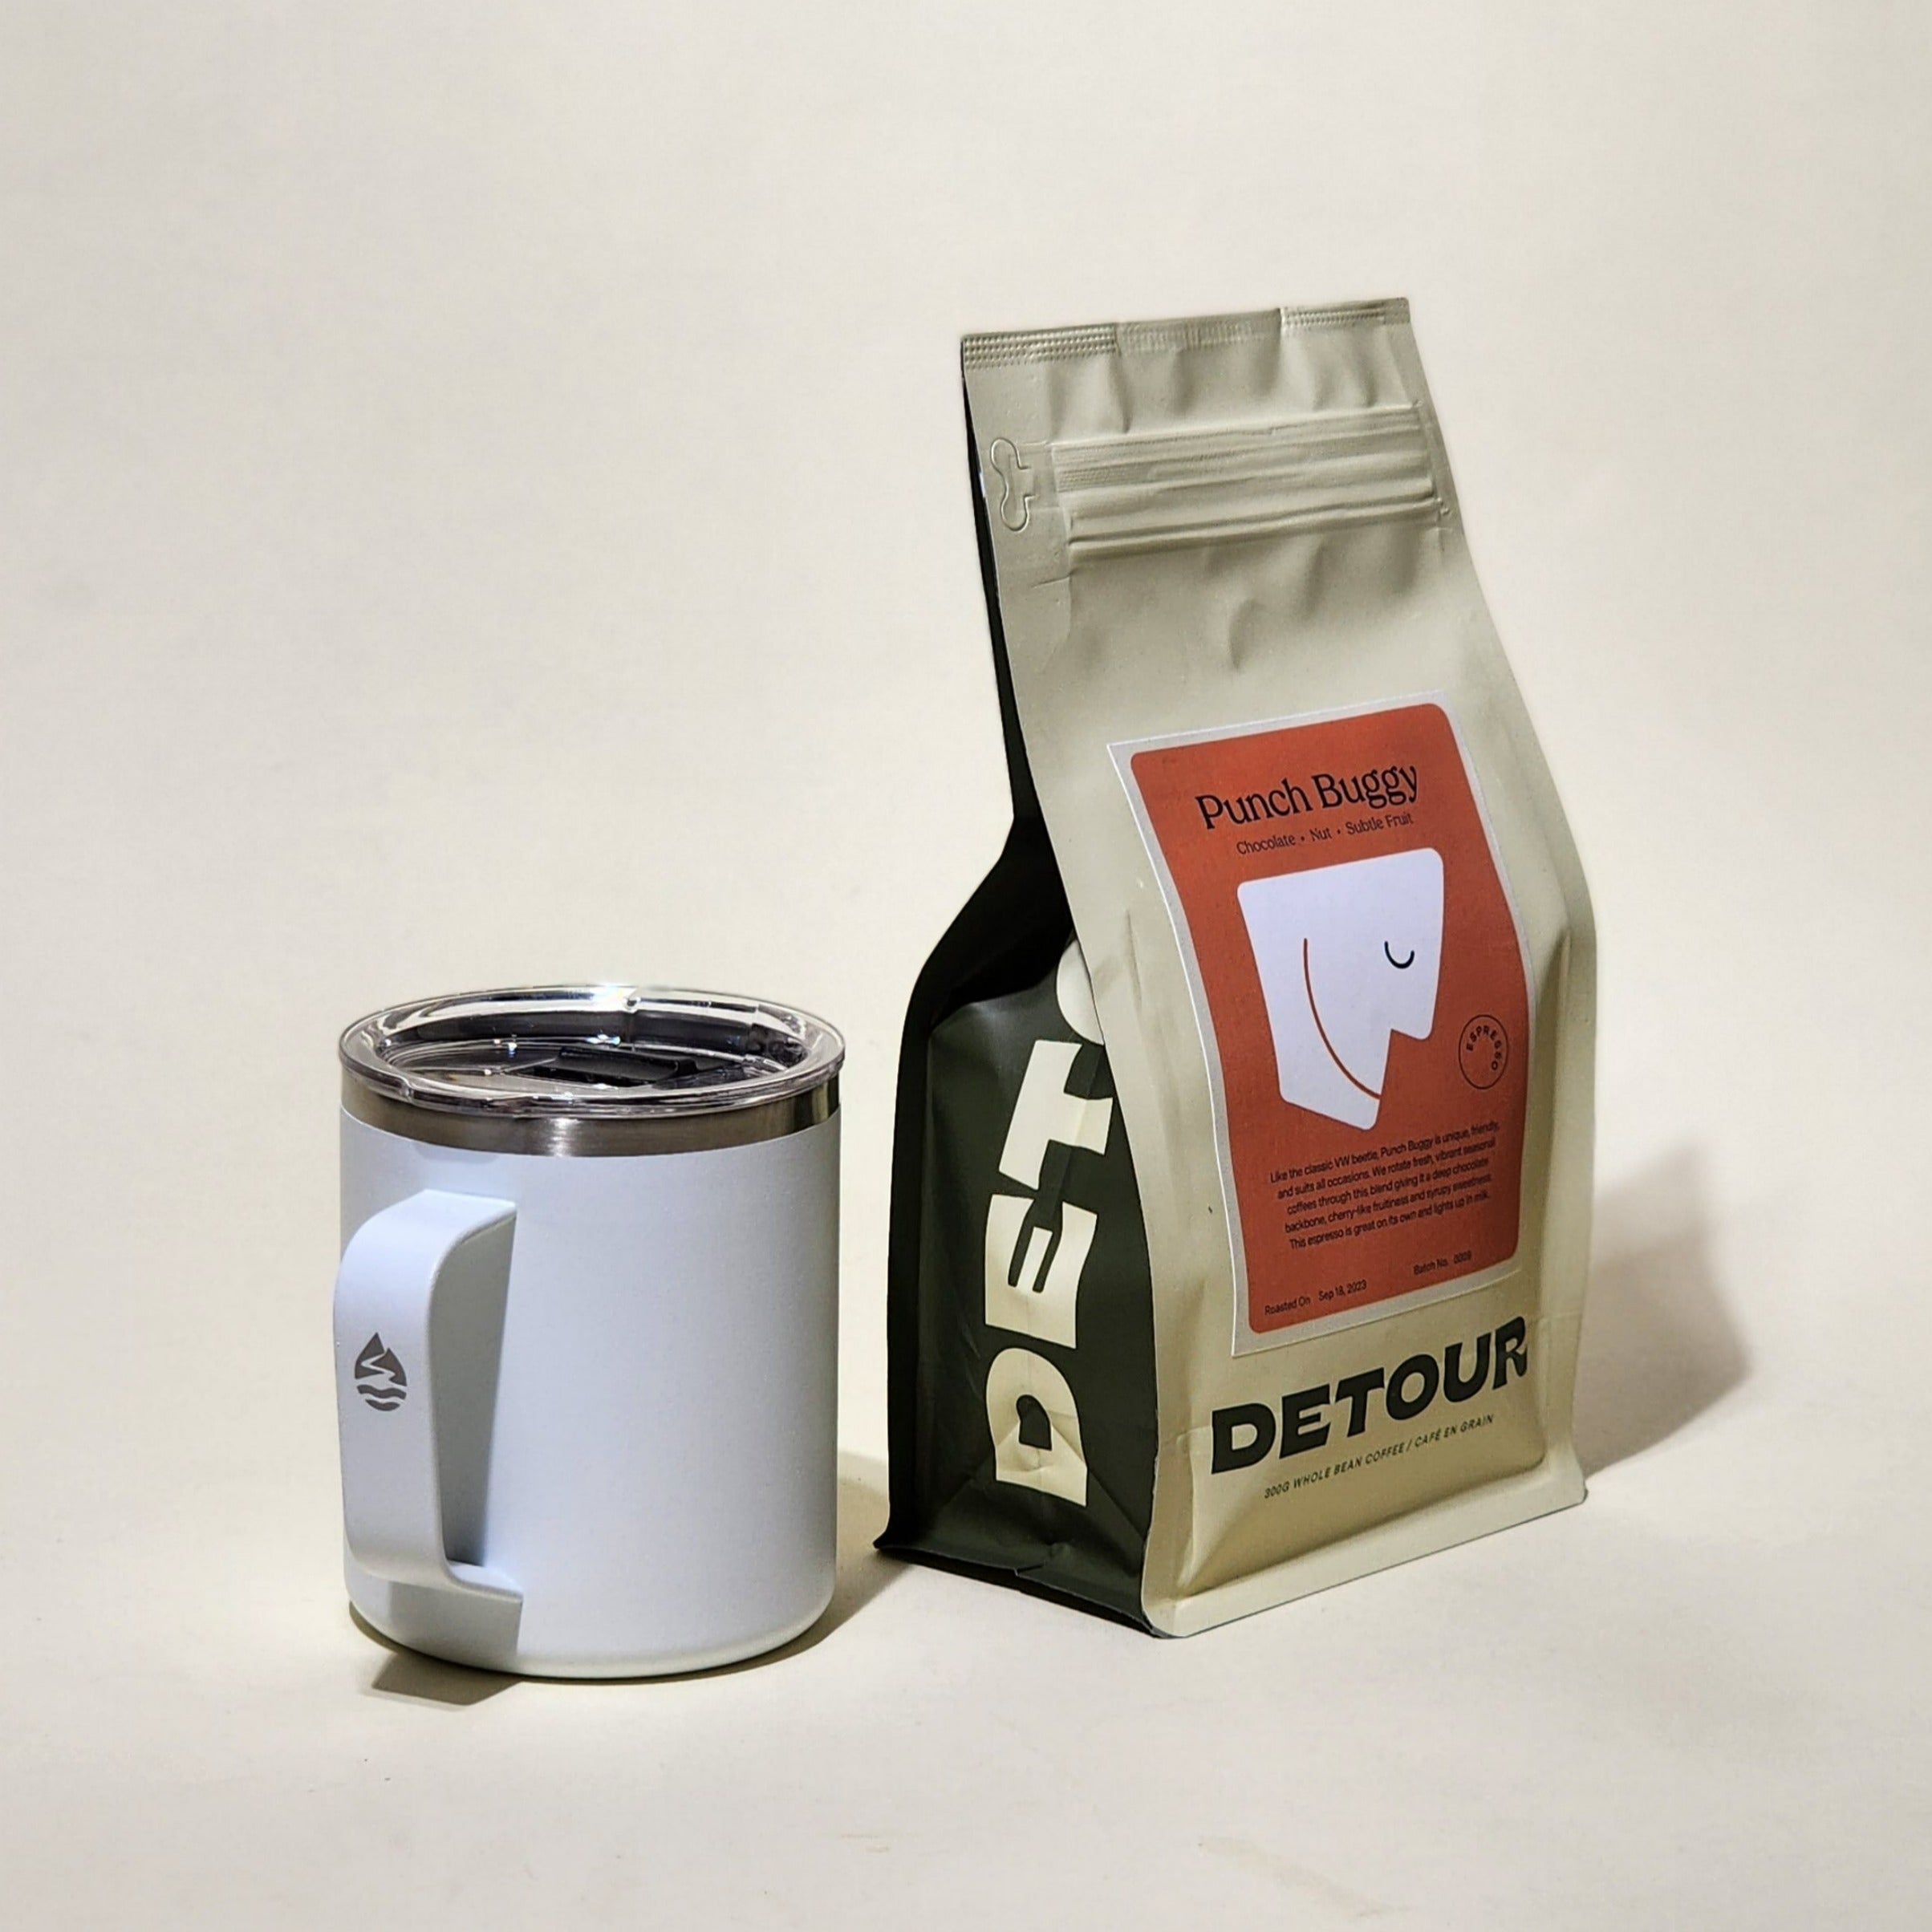 Detour Coffee Roaster Punch Buggy Espresso - Chocolate, Hazelnut, Cherry Tasting Profile - Espresso Balanced Coffee Style - Brazil + Central American Origin - Learn More on Our Website